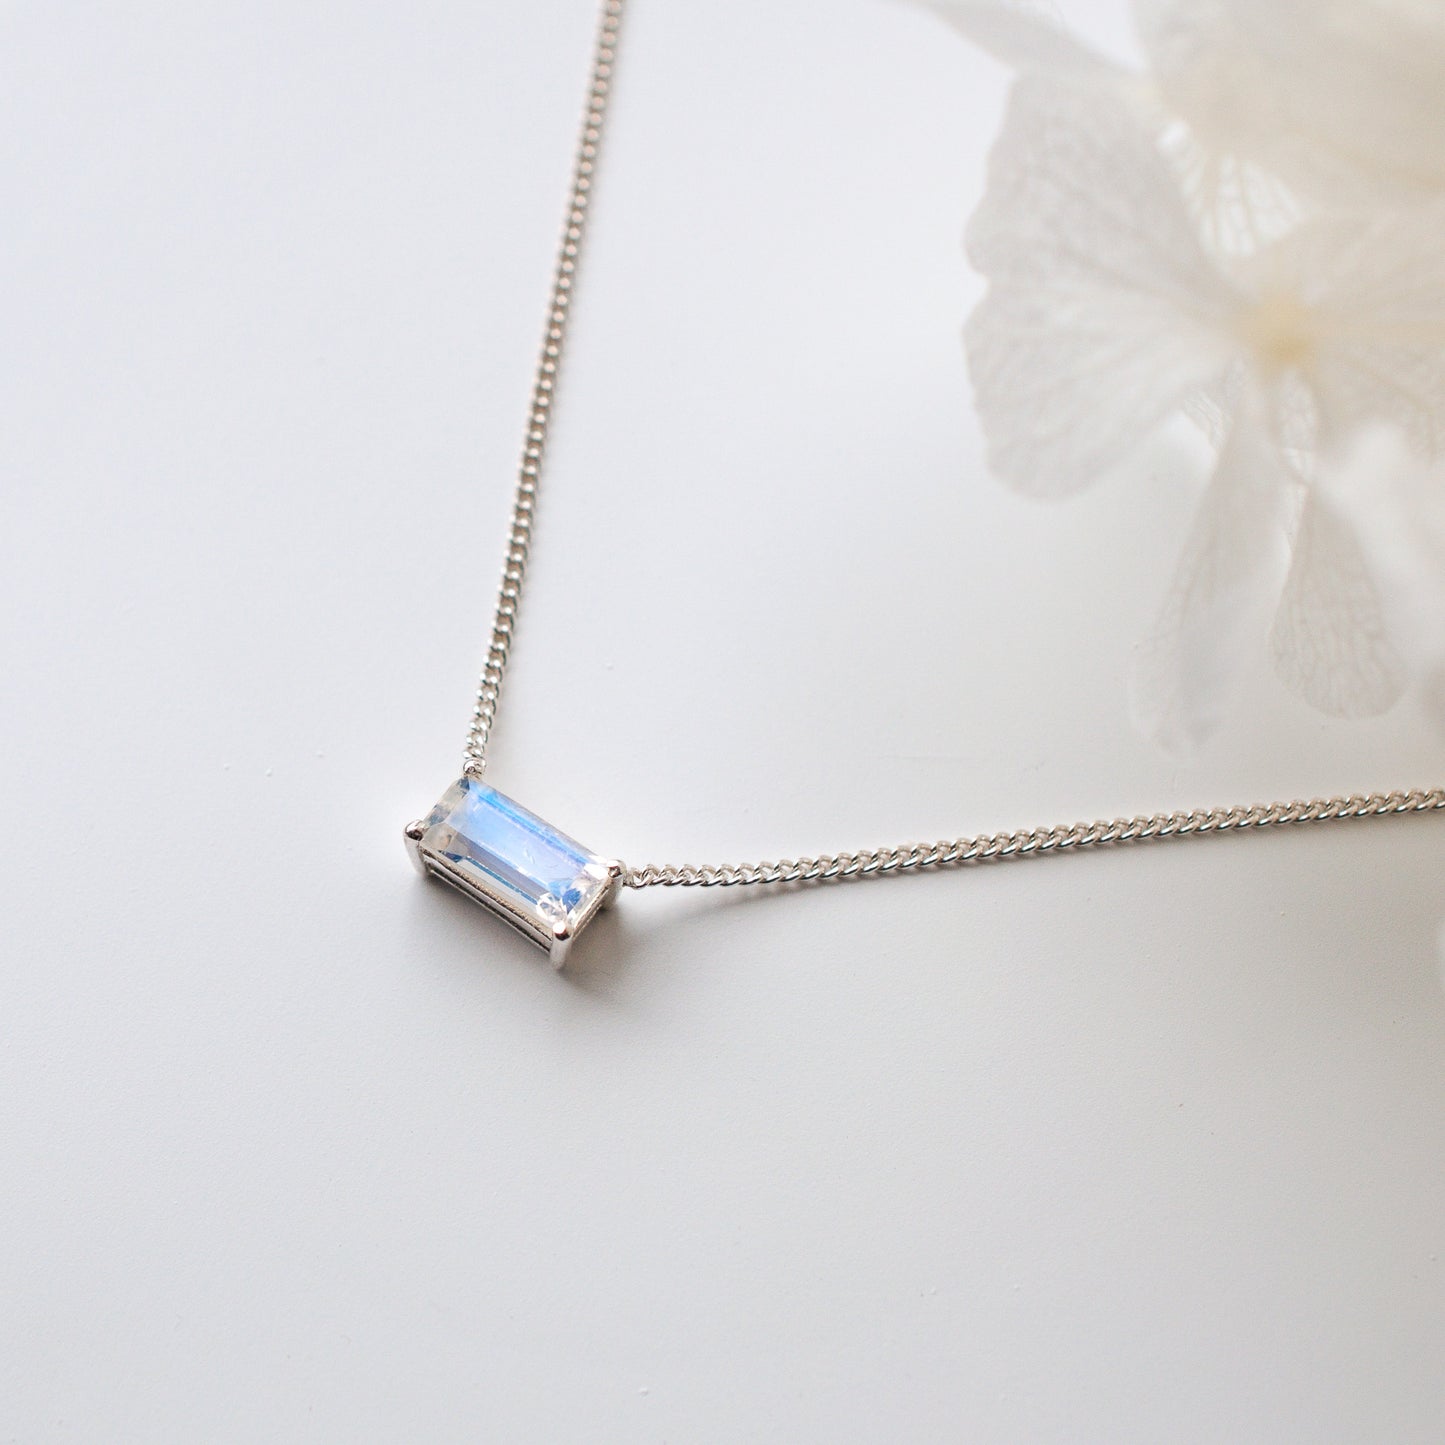 horizontal baguette rainbow moonstone pendant necklace with fine silver chain and flower on white surface